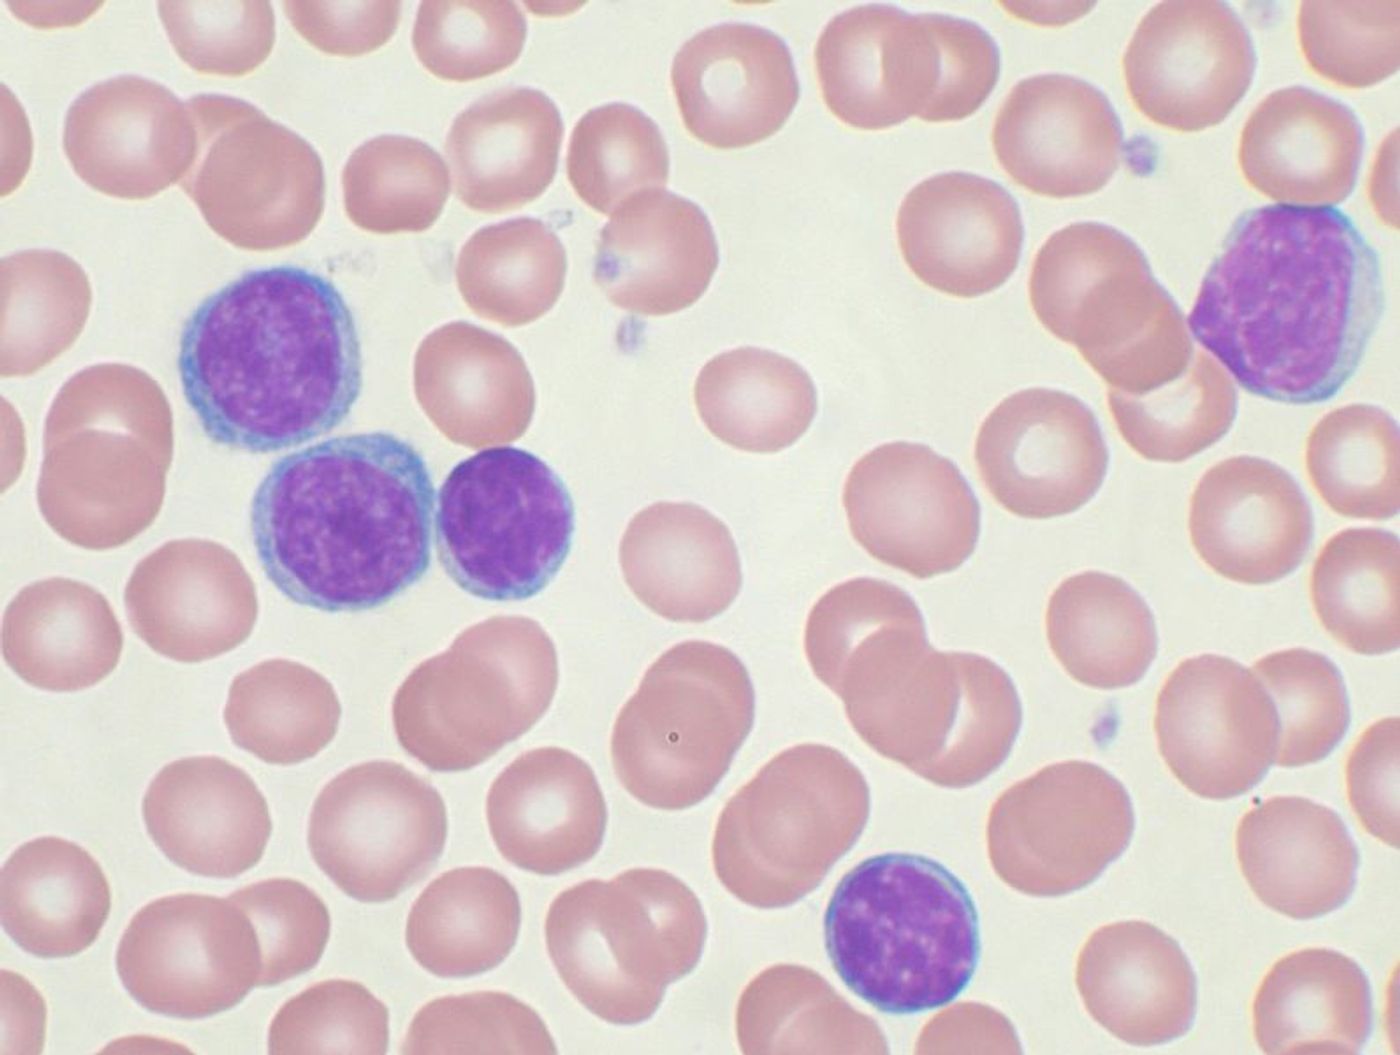 A Wright's stained peripheral blood smear showing chronic lymphocytic leukemia (CLL). The lymphocytes with the darkly staining nuclei and scant cytoplasm are the CLL cells.